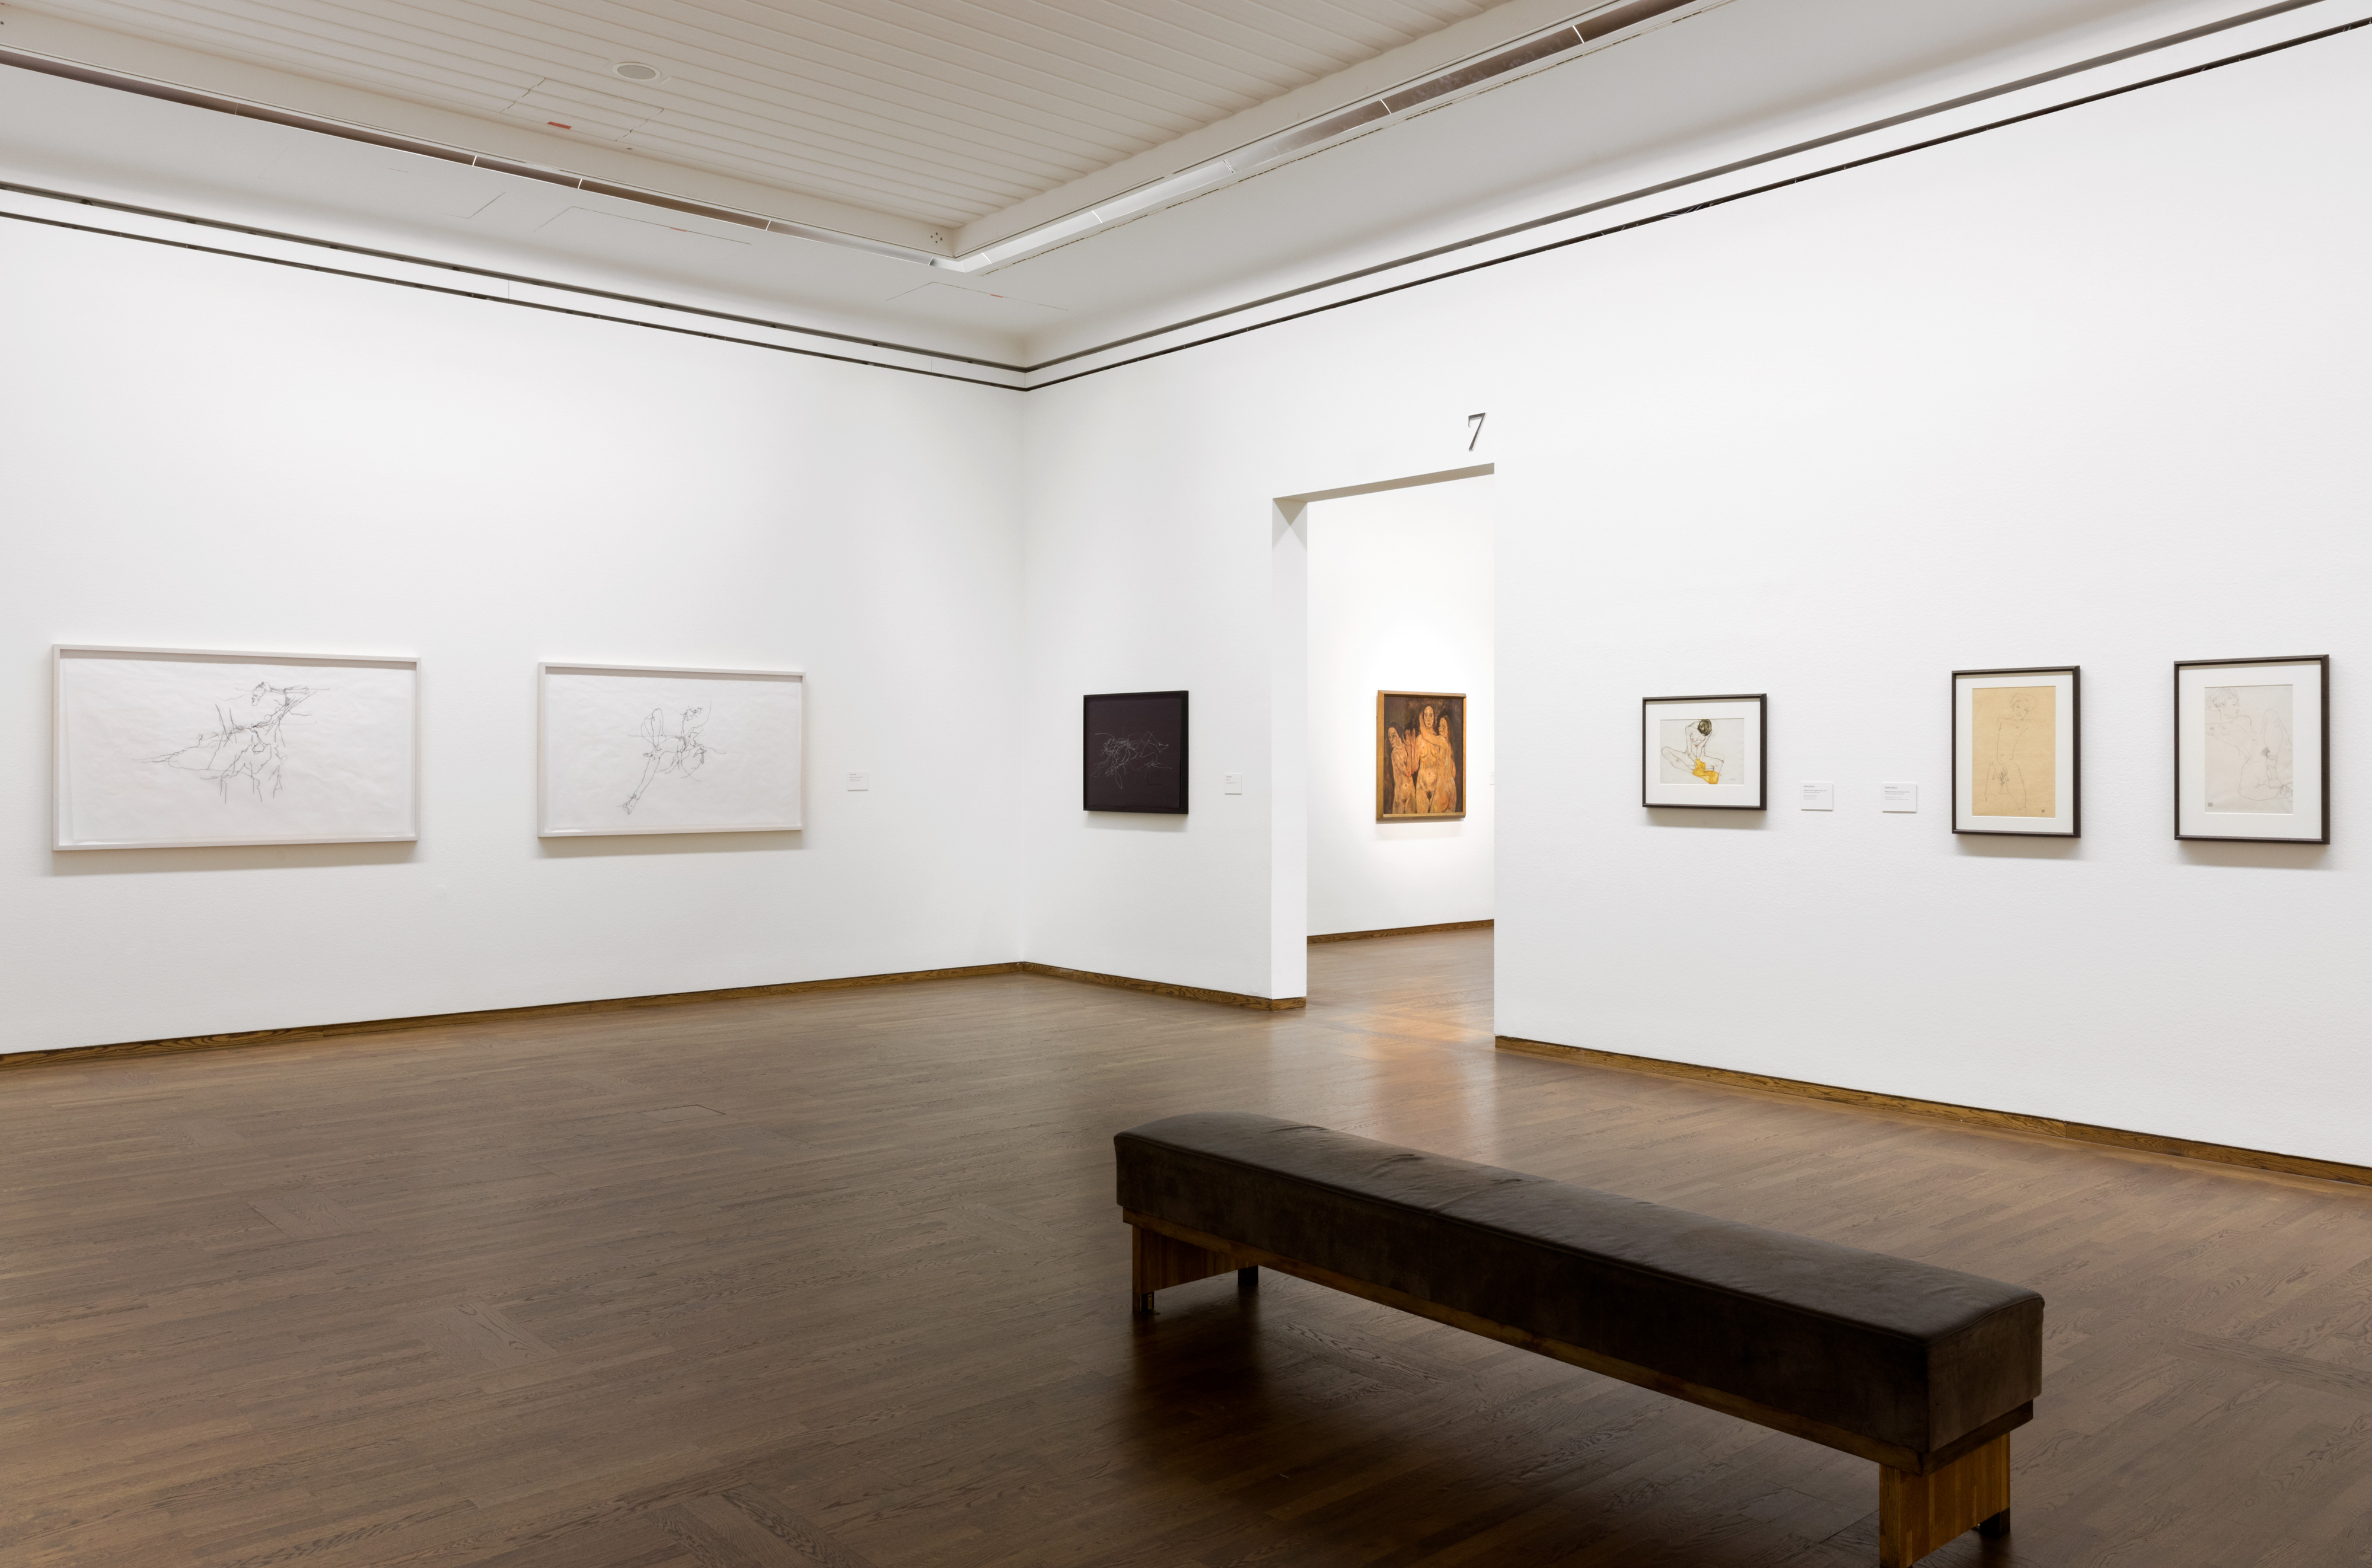 Galerie Barbara Thumm \ Chloe Piene &#8211; SCHIELE RELOADED AT THE LEOPOLD MUSEUM: NEW IMPETUS FOR JUBILEE SHOW